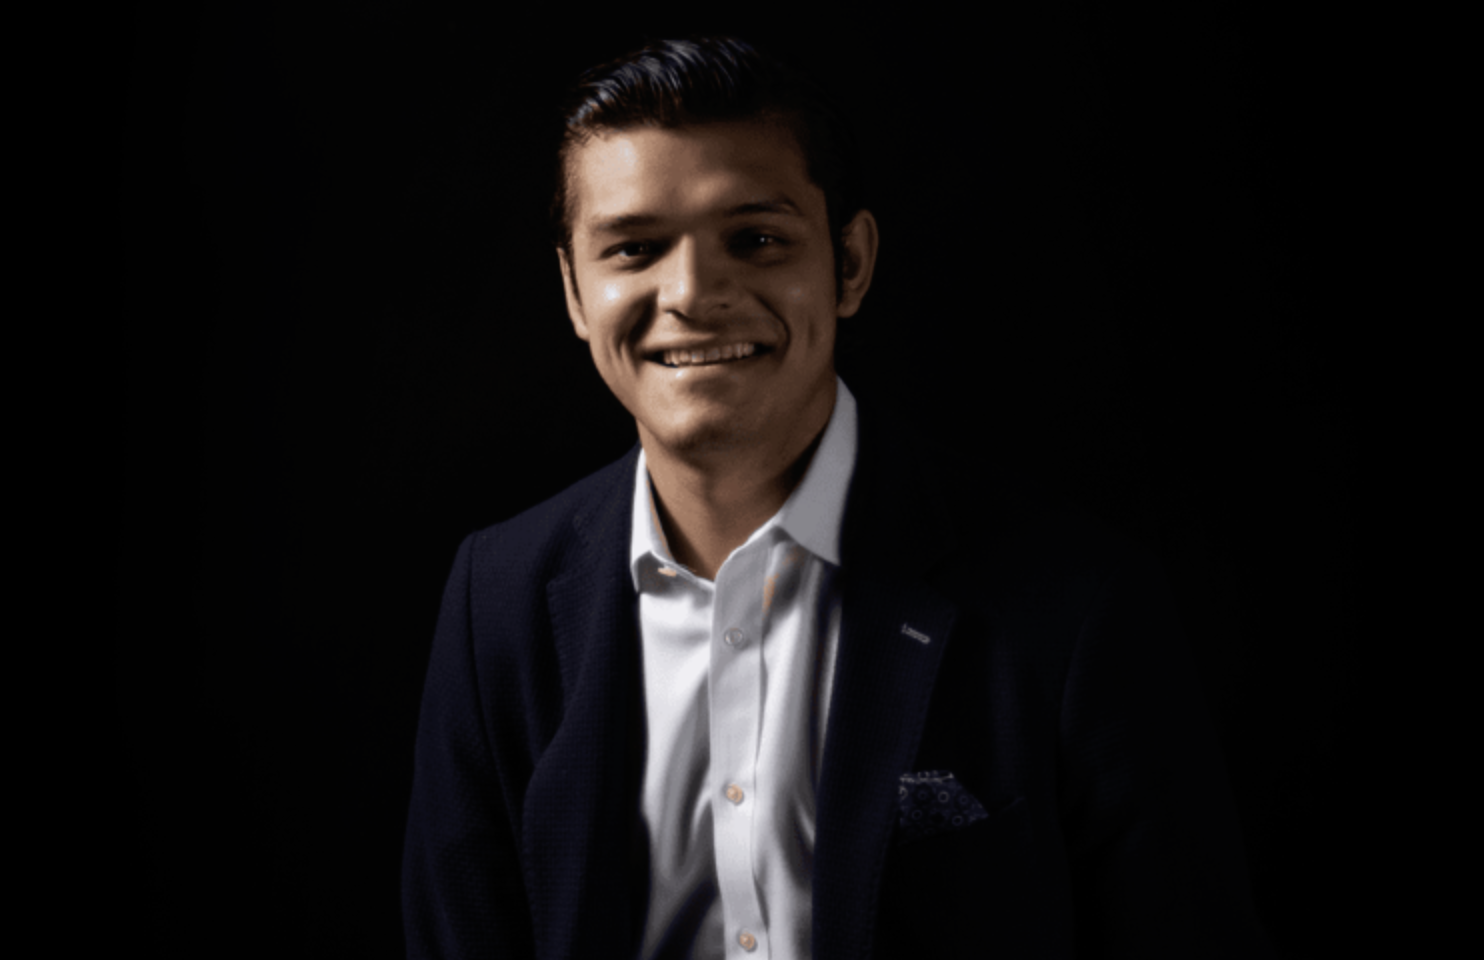 After receiving his undergraduate degree from George Washington University, Batten student Cam Morales (MPP ’22) landed a job with renowned international law firm Akin Gump Strauss Hauer & Feld, where he worked as a public policy specialist. While the work was immensely satisfying, he felt like something was missing. That led him on the path to the Batten School’s unique graduate program.